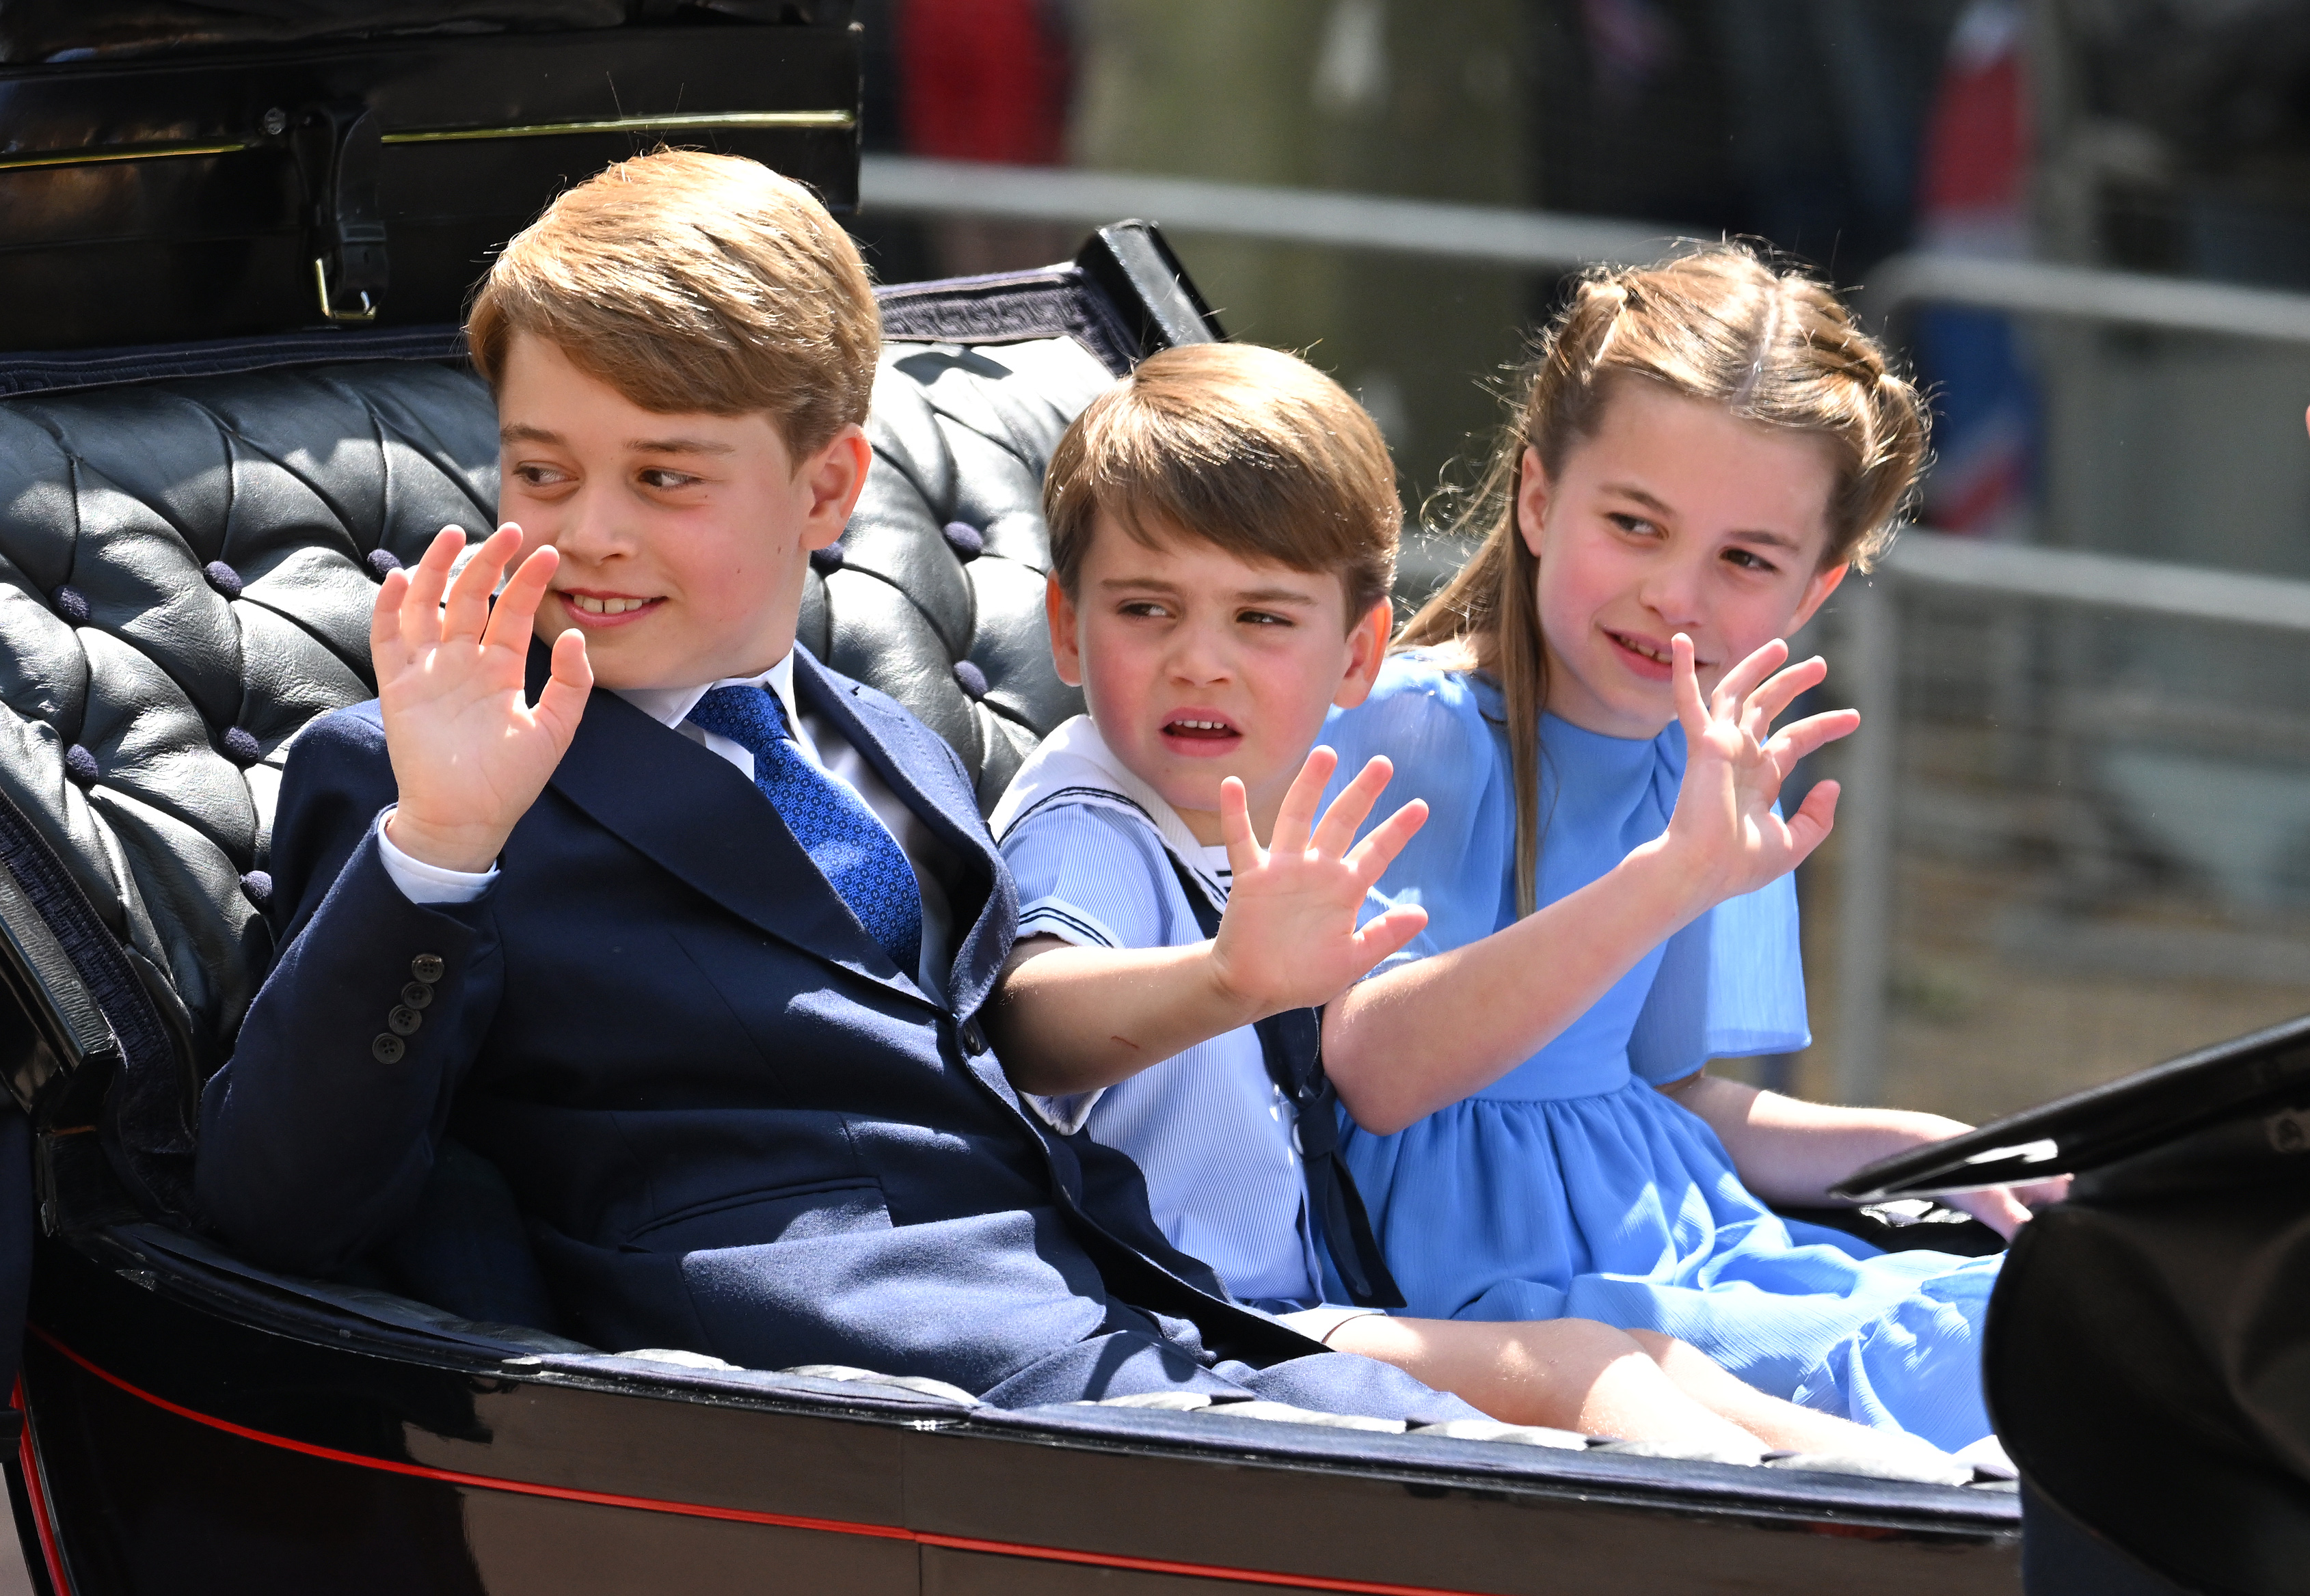 <p>Prince George, Prince Louis and Princess Charlotte waved in unison during the <a href="https://www.wonderwall.com/celebrity/royals/trooping-the-colour-2022-see-all-the-best-photos-of-the-cambridge-kids-duchess-kate-and-more-royals-amid-the-queens-platinum-jubilee-605764.gallery">Trooping the Colour</a> carriage procession -- their first time participating -- which kicked off Queen Elizabeth II's <a href="https://www.wonderwall.com/celebrity/royals/platinum-jubilee-see-the-best-photos-from-4-days-of-celebrations-marking-the-queens-70-year-reign-606239.gallery">Platinum Jubilee celebrations</a> in London on June 2, 2022. </p>